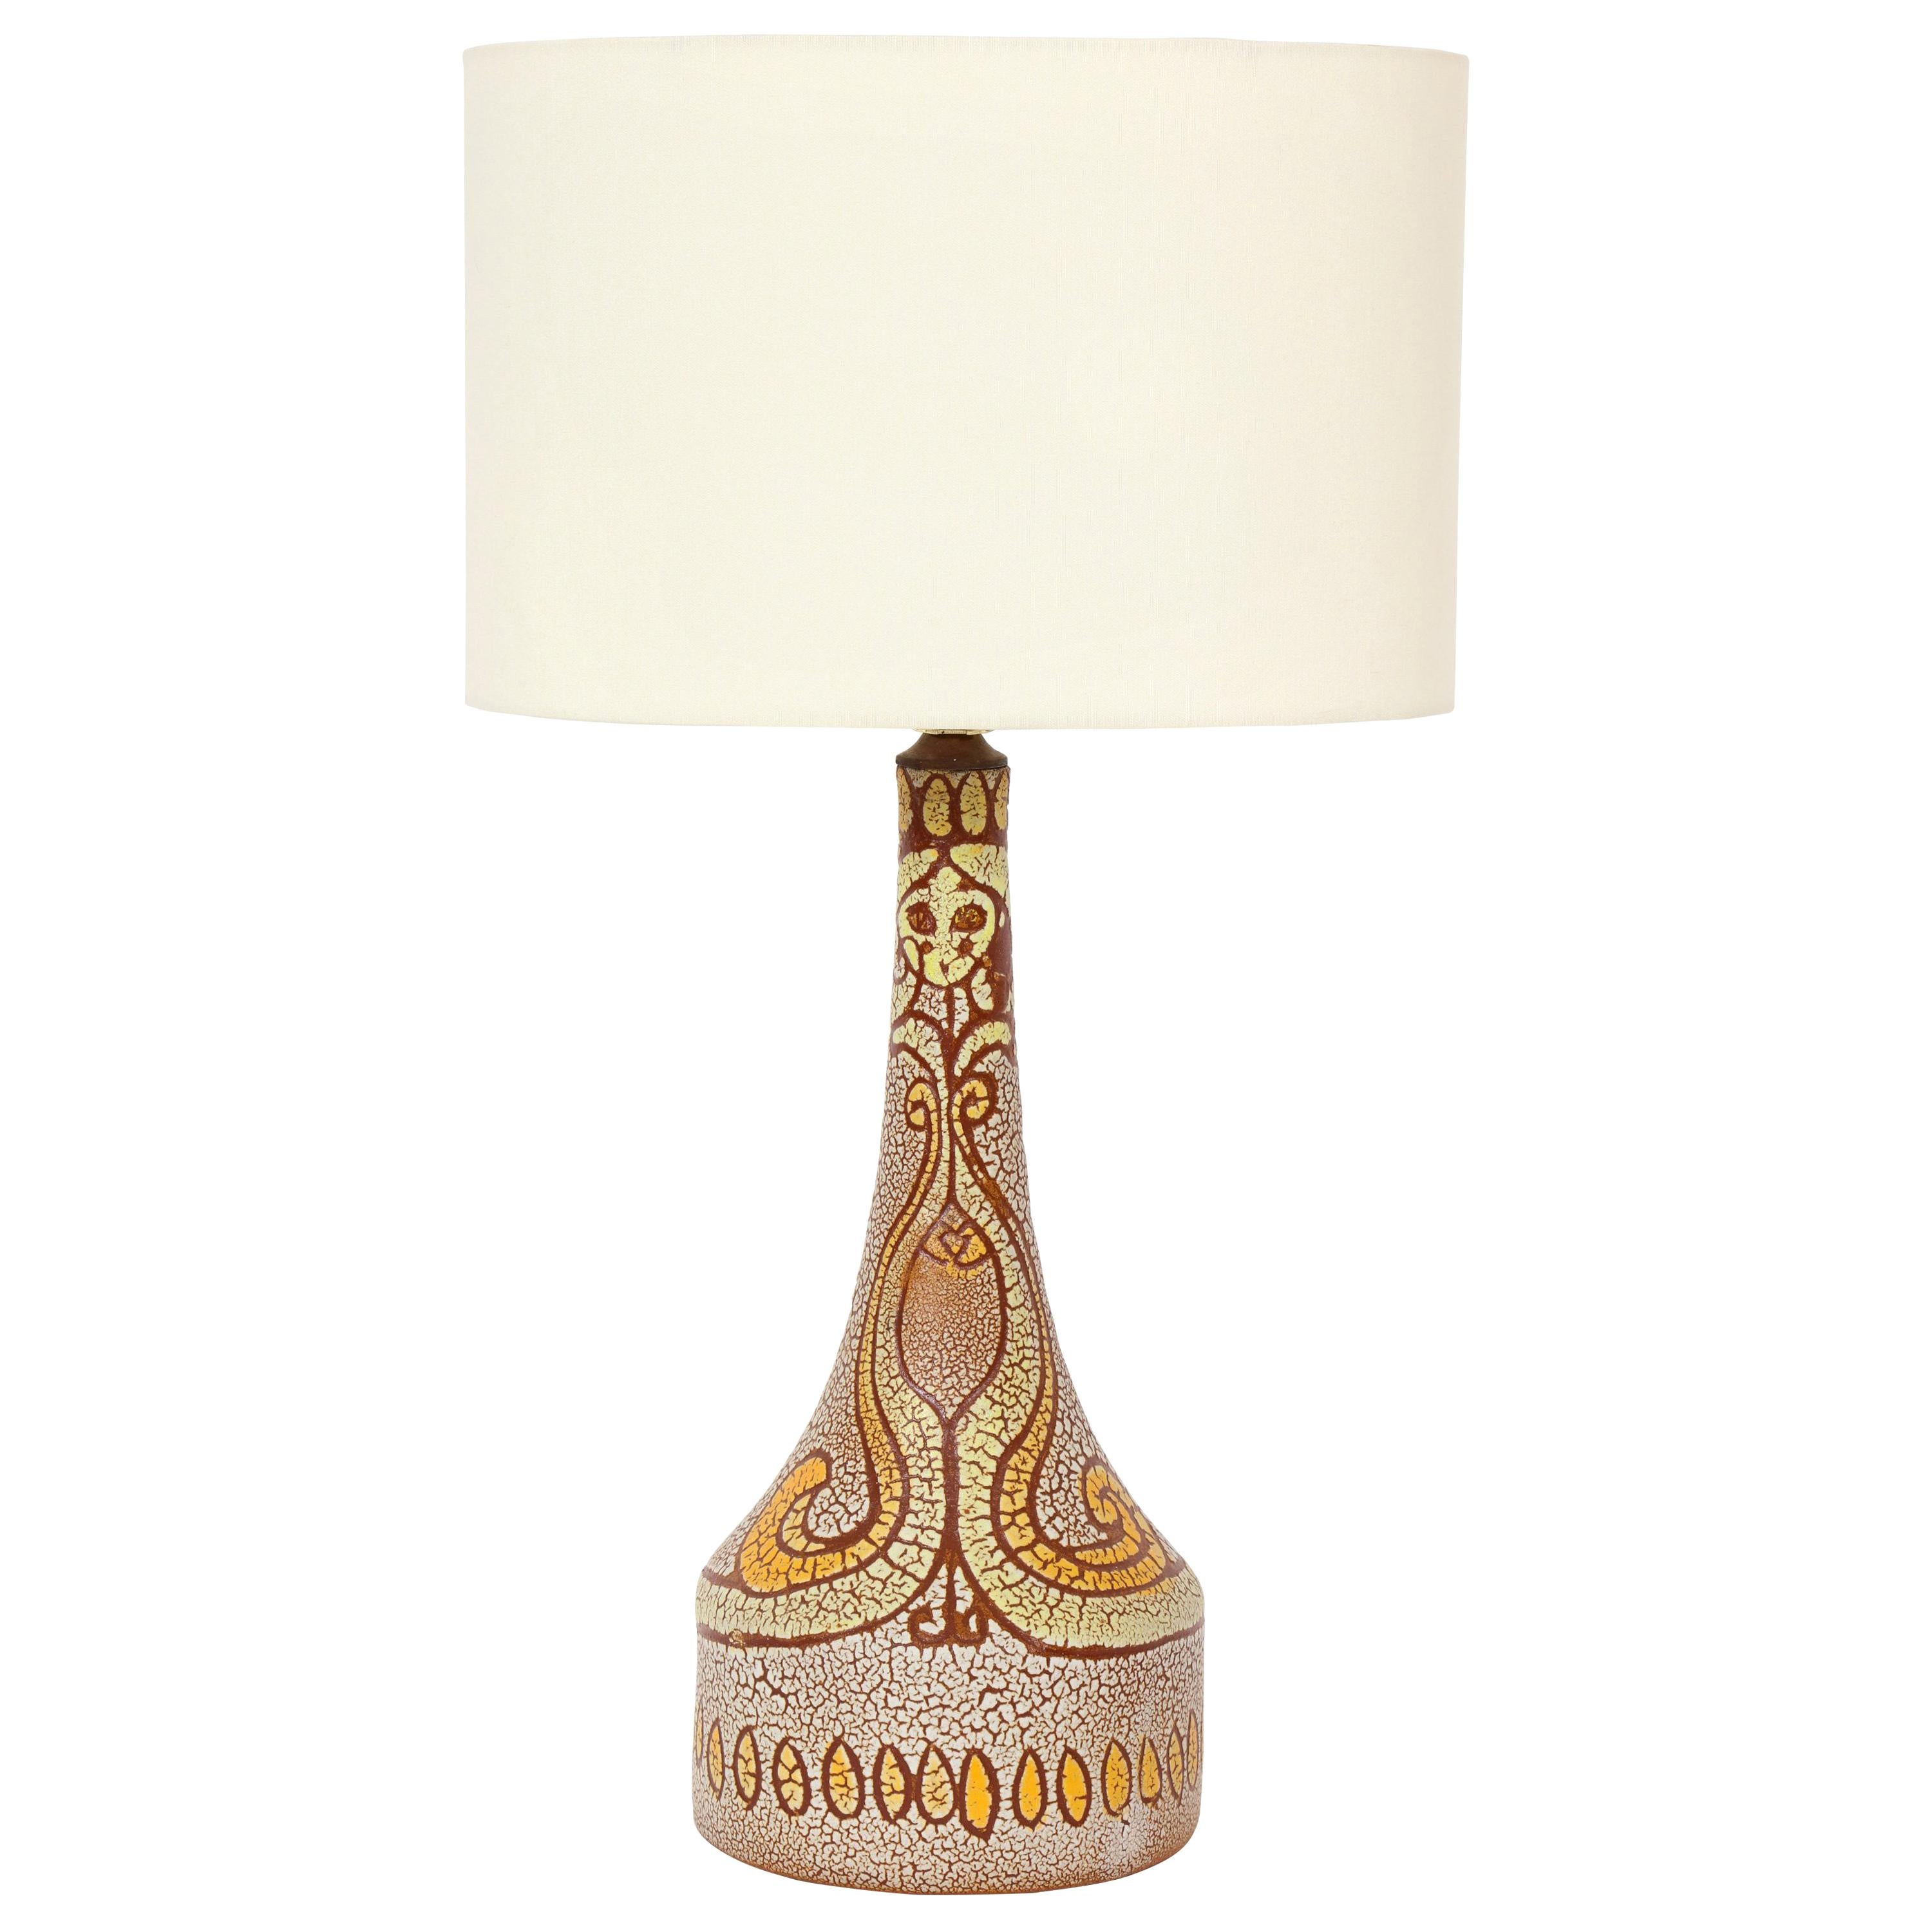 Midcentury Accolay Yellow, Orange, Brown Ceramic Table Lamp, France, 1950 For Sale